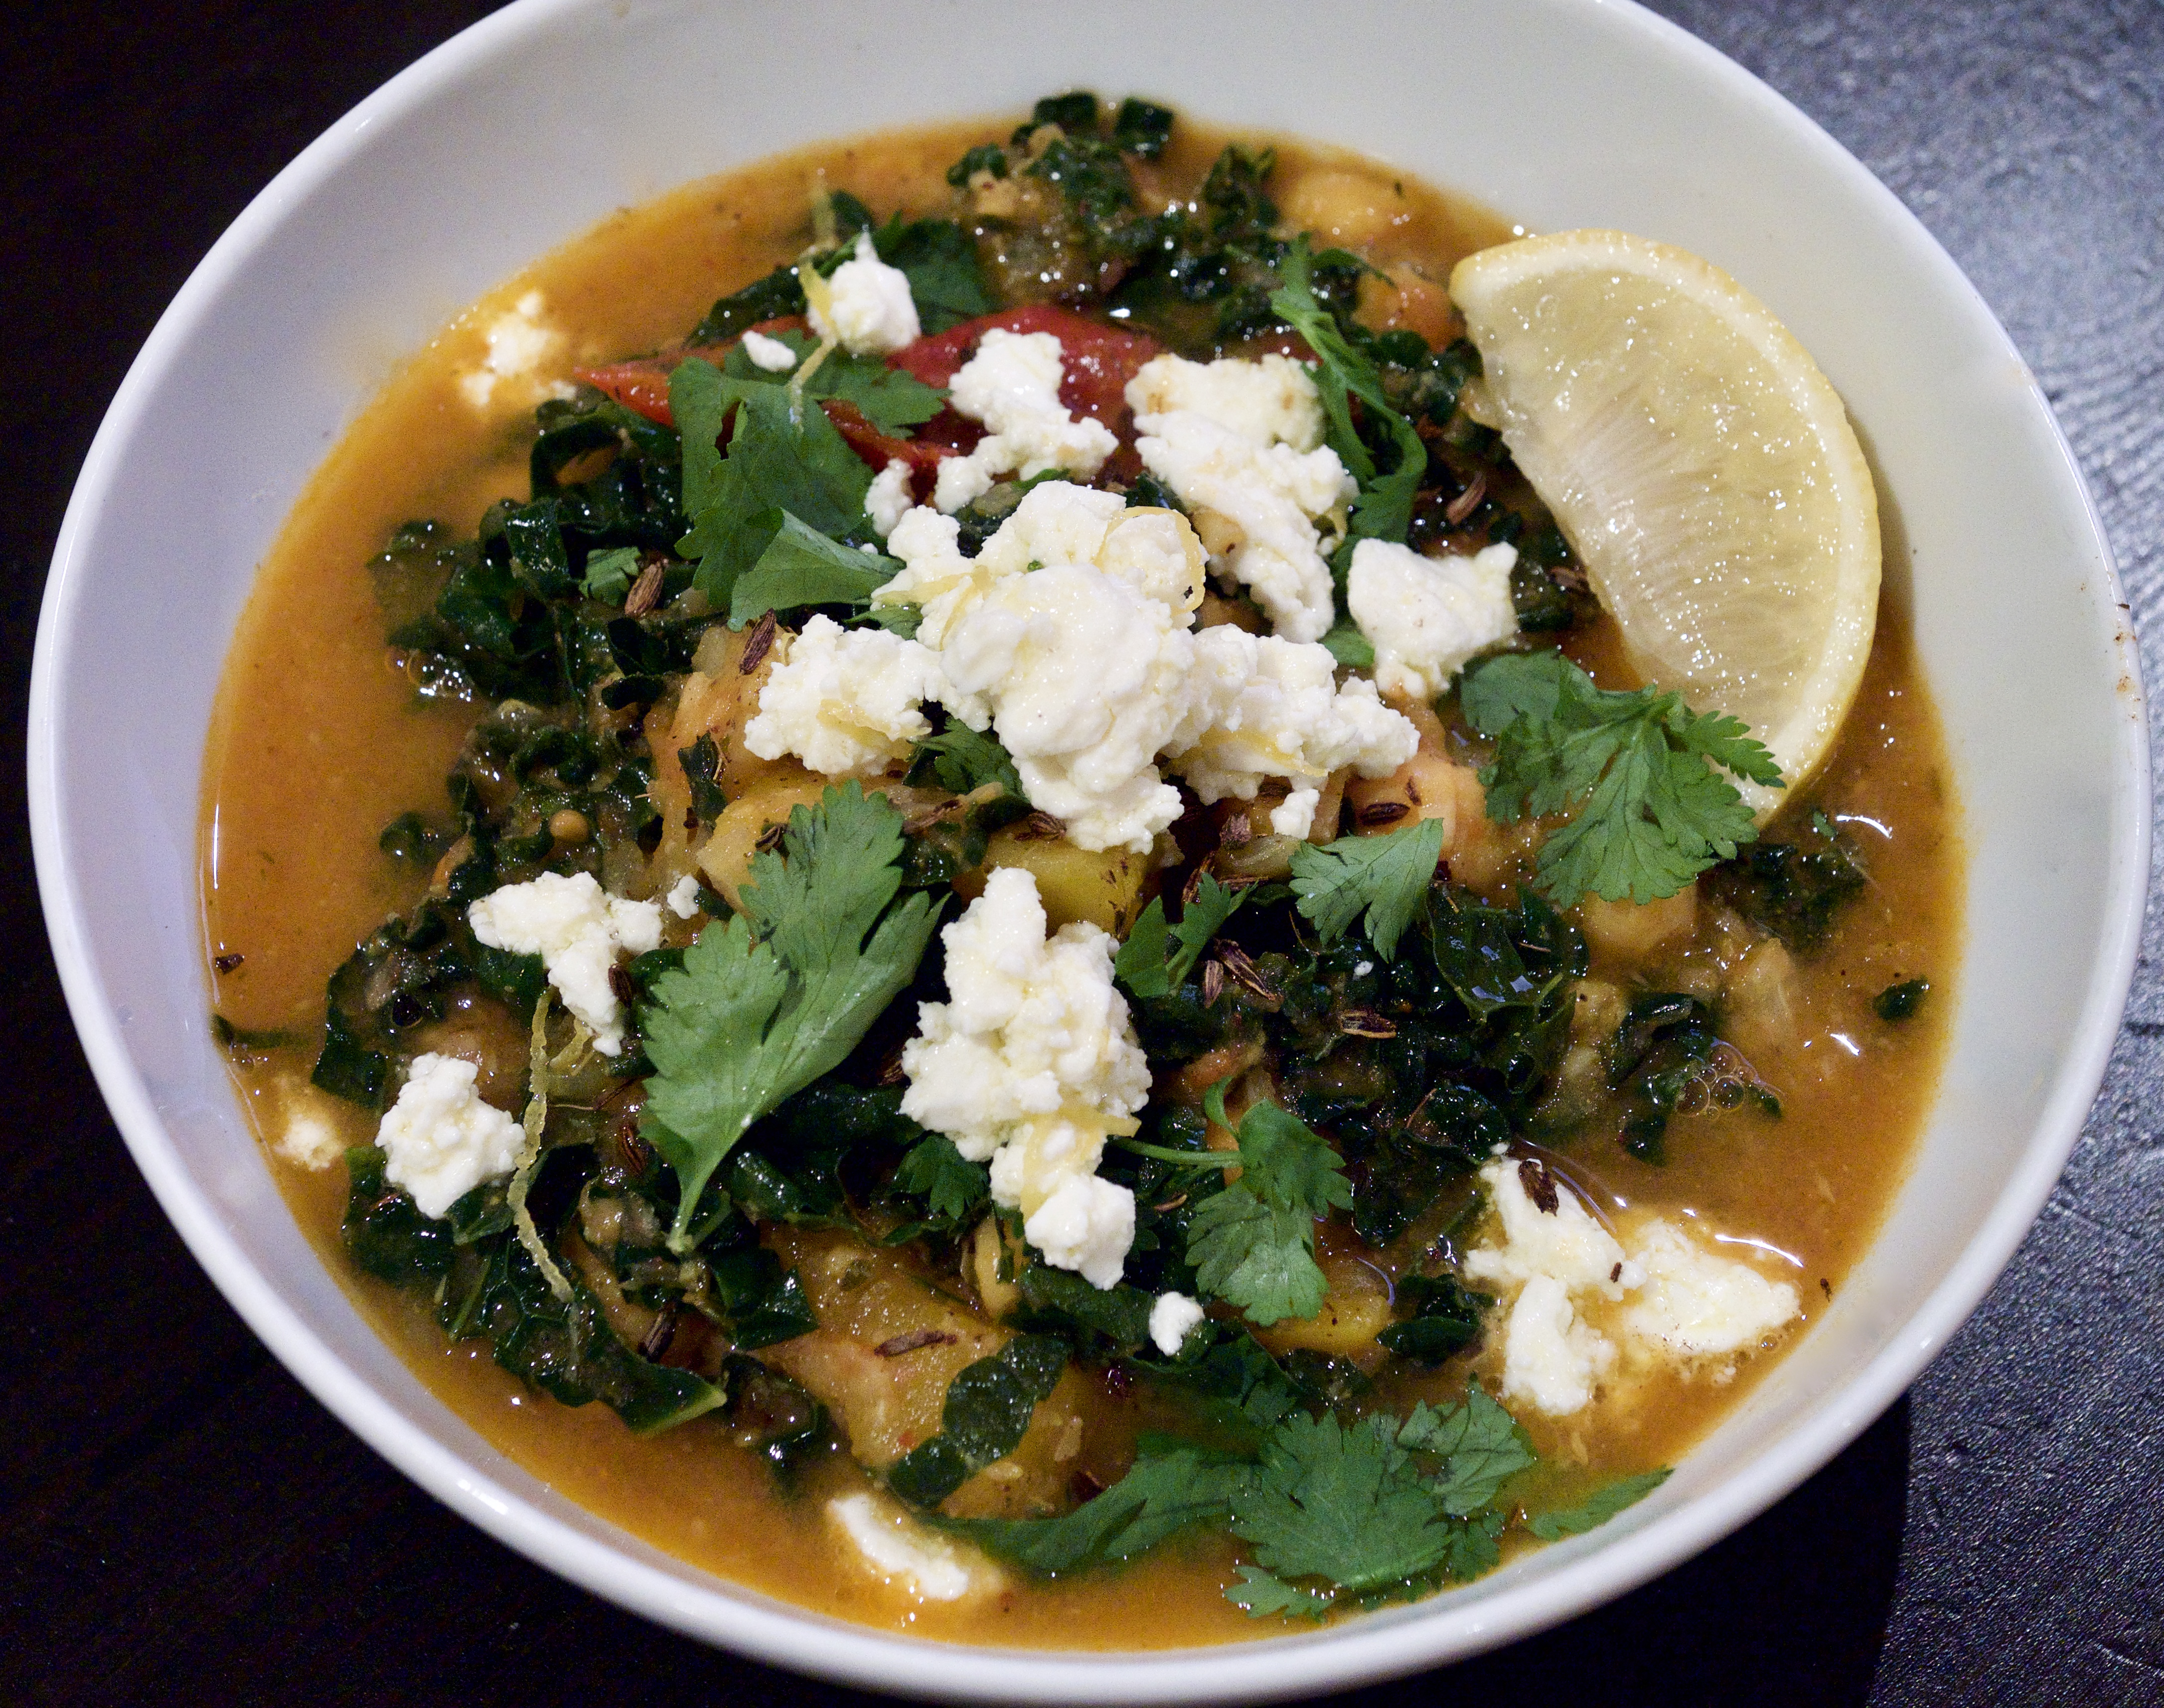 Maroccan kale, chickpea and squash stew